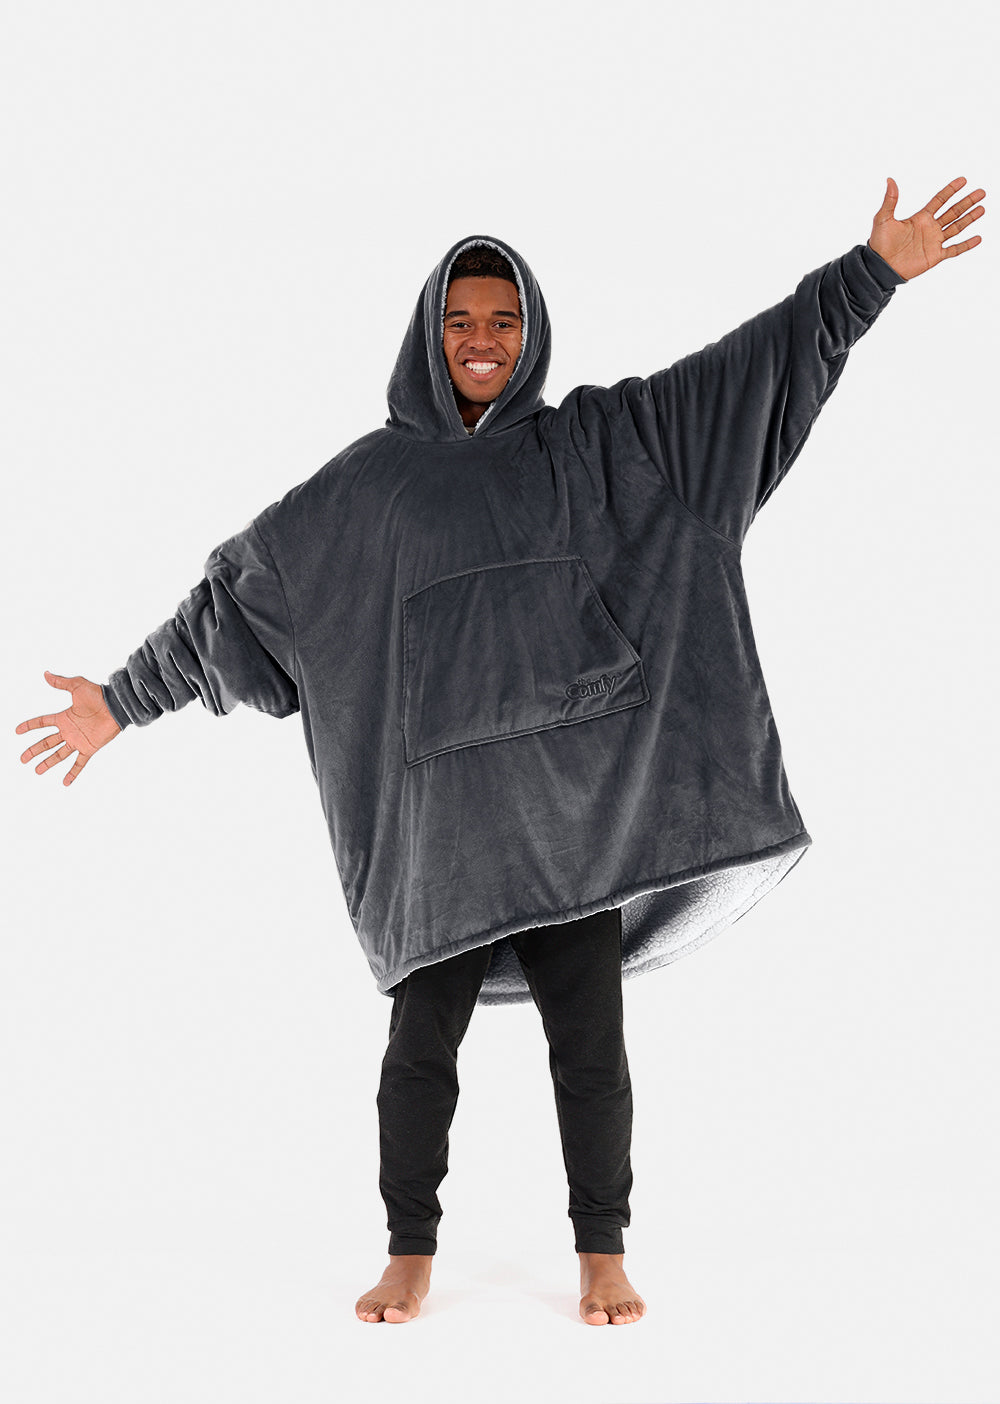  THE COMFY Original Elf Costume Wearable Blanket for Women and  Men, Oversized Microfiber and Sherpa Blankets As Seen On Shark Tank : Home  & Kitchen